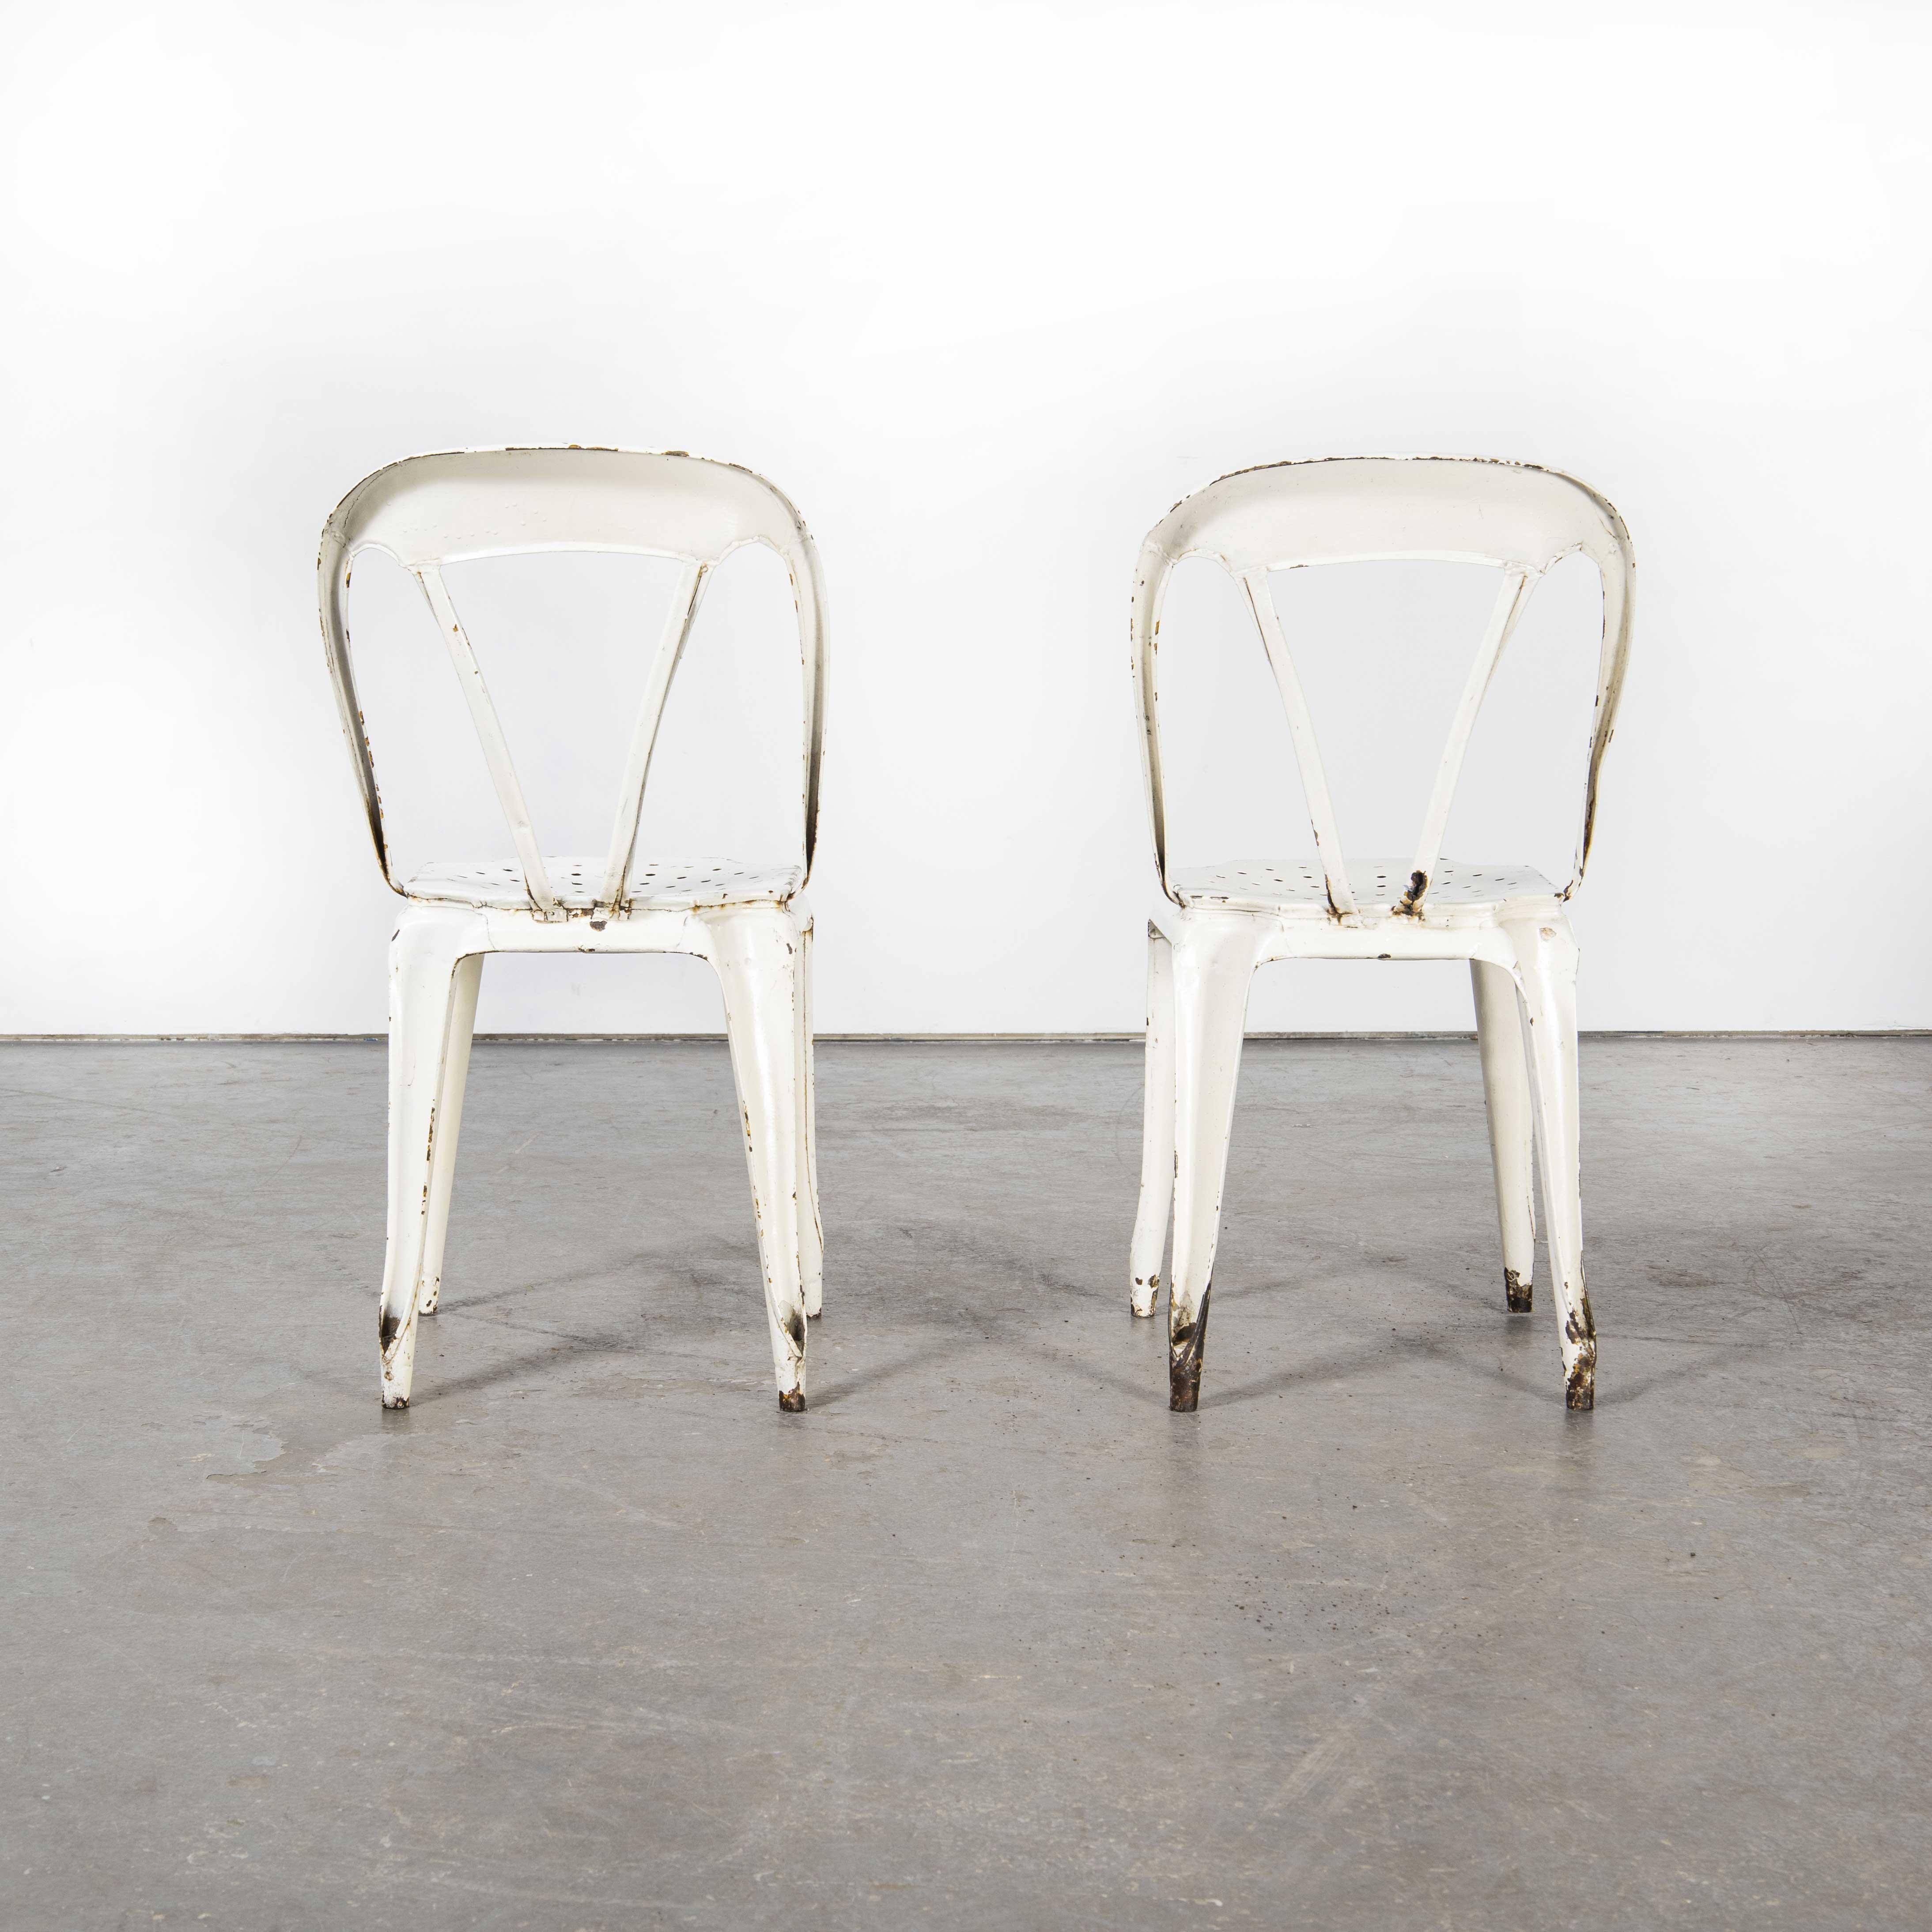 1950’s Original French Multipl’s Metal Dining Chairs, Pair For Sale 1